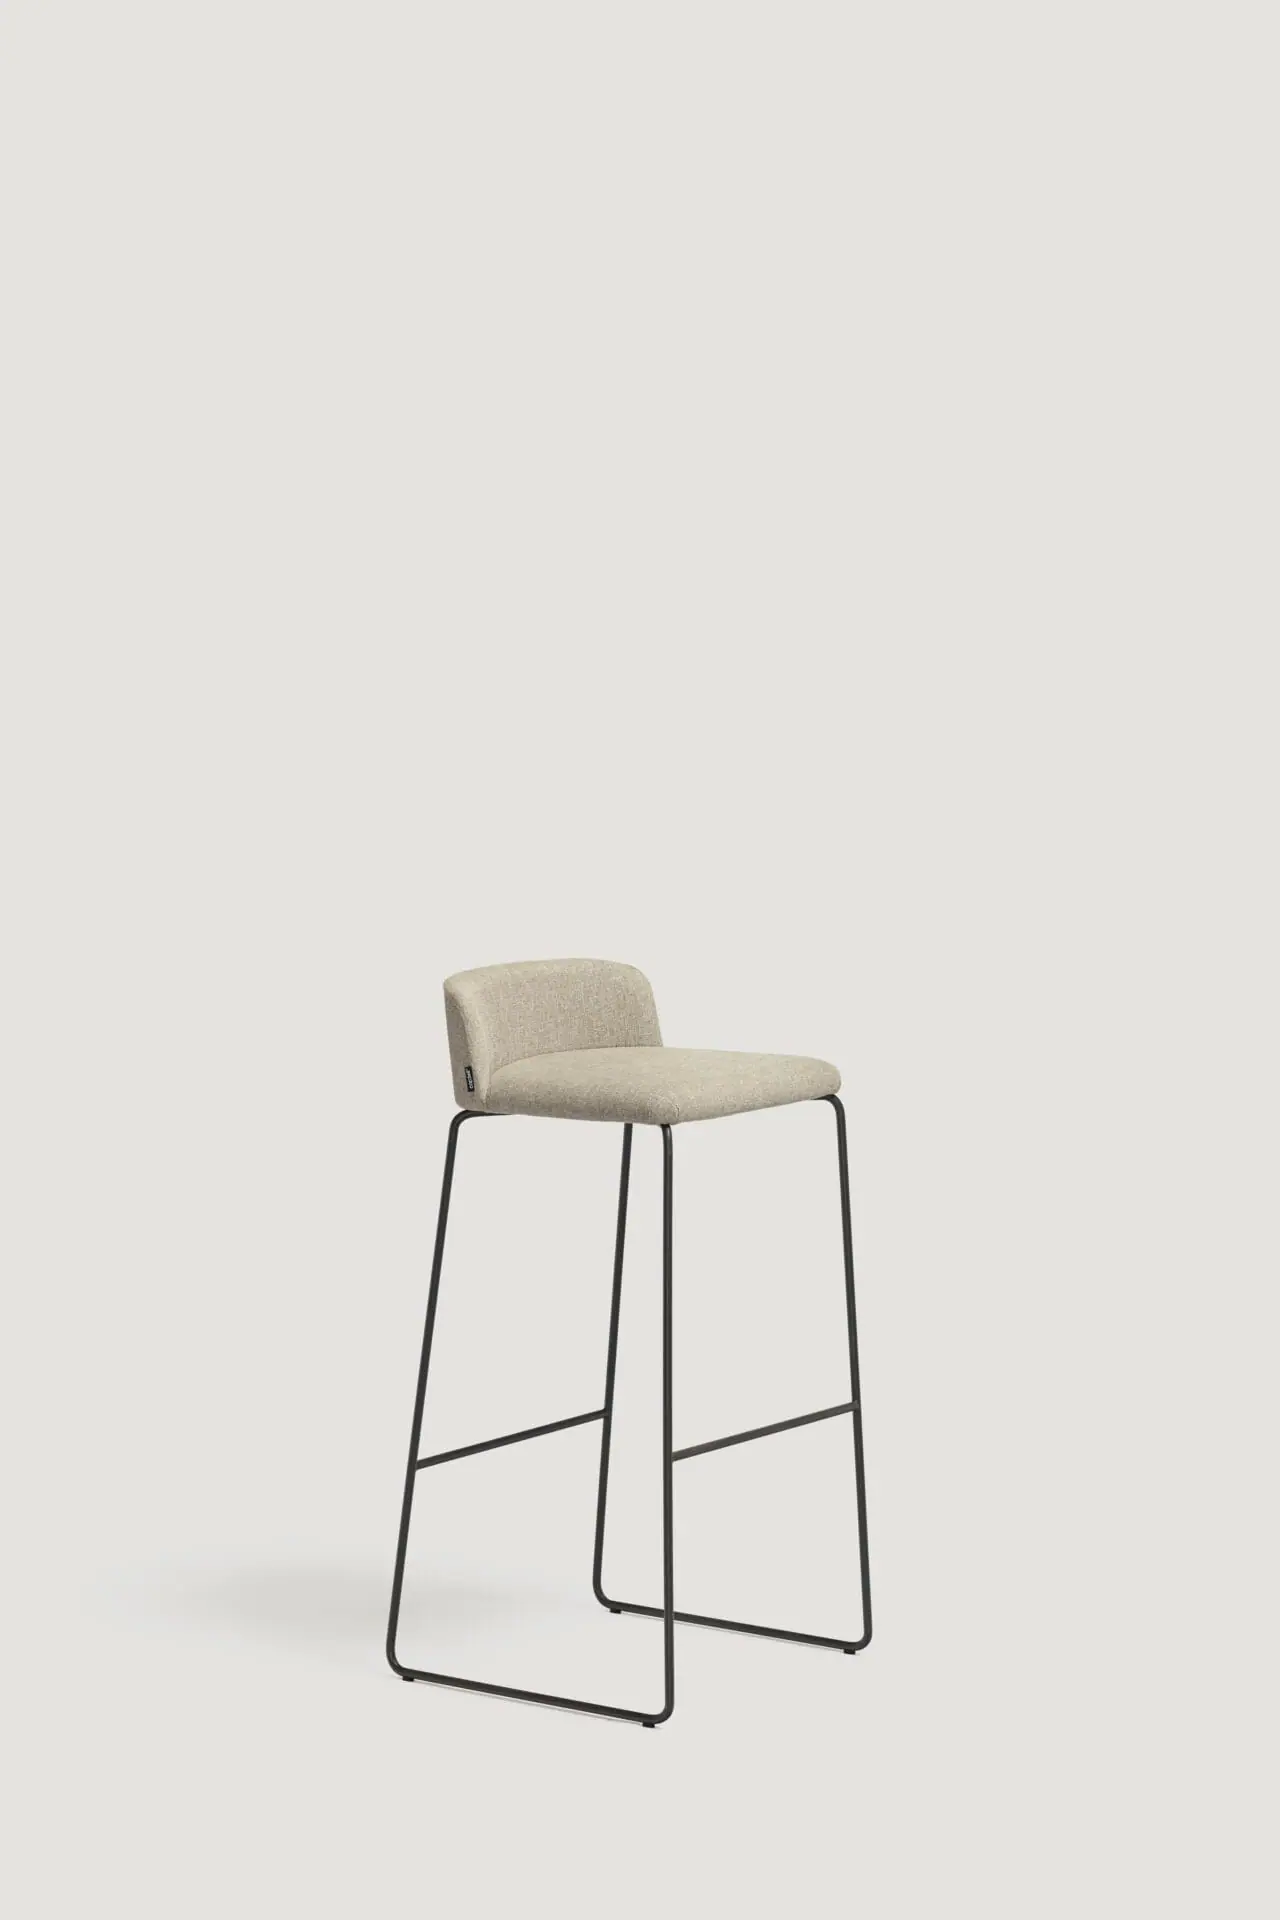 capdell-concord-stool-05